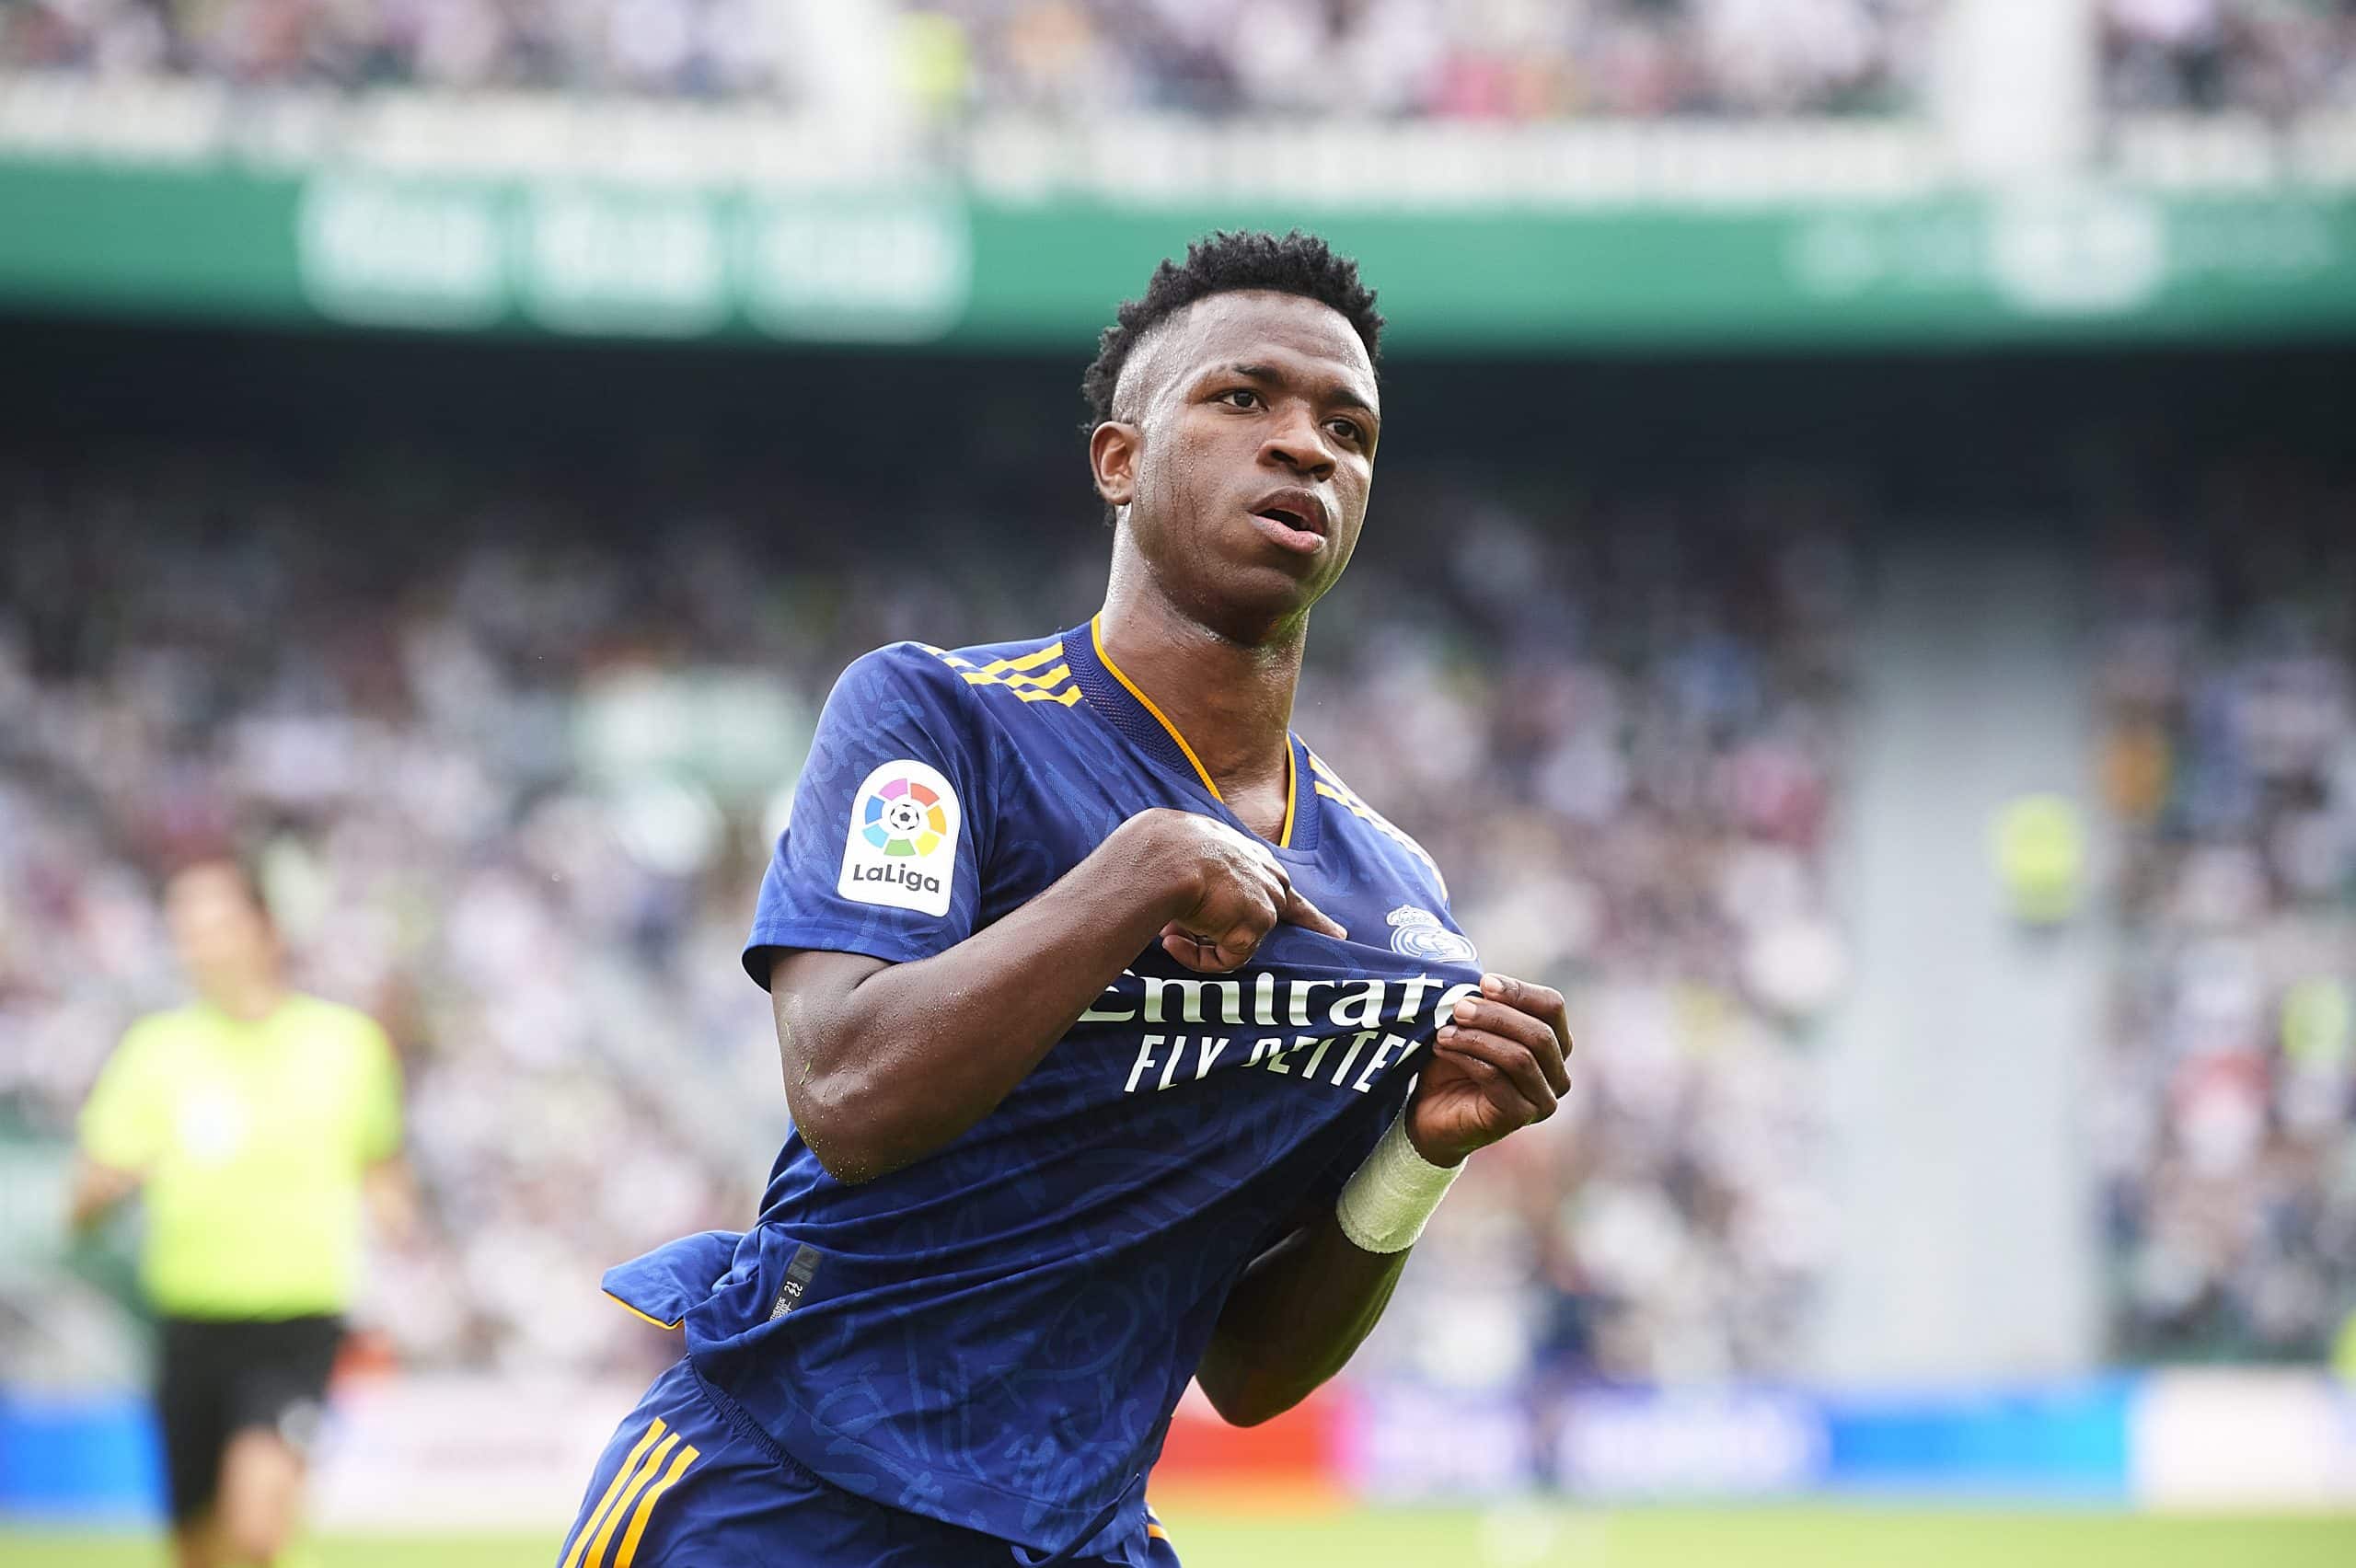 Real Madrid traveling squad to face Getafe released without Vinícius Júnior